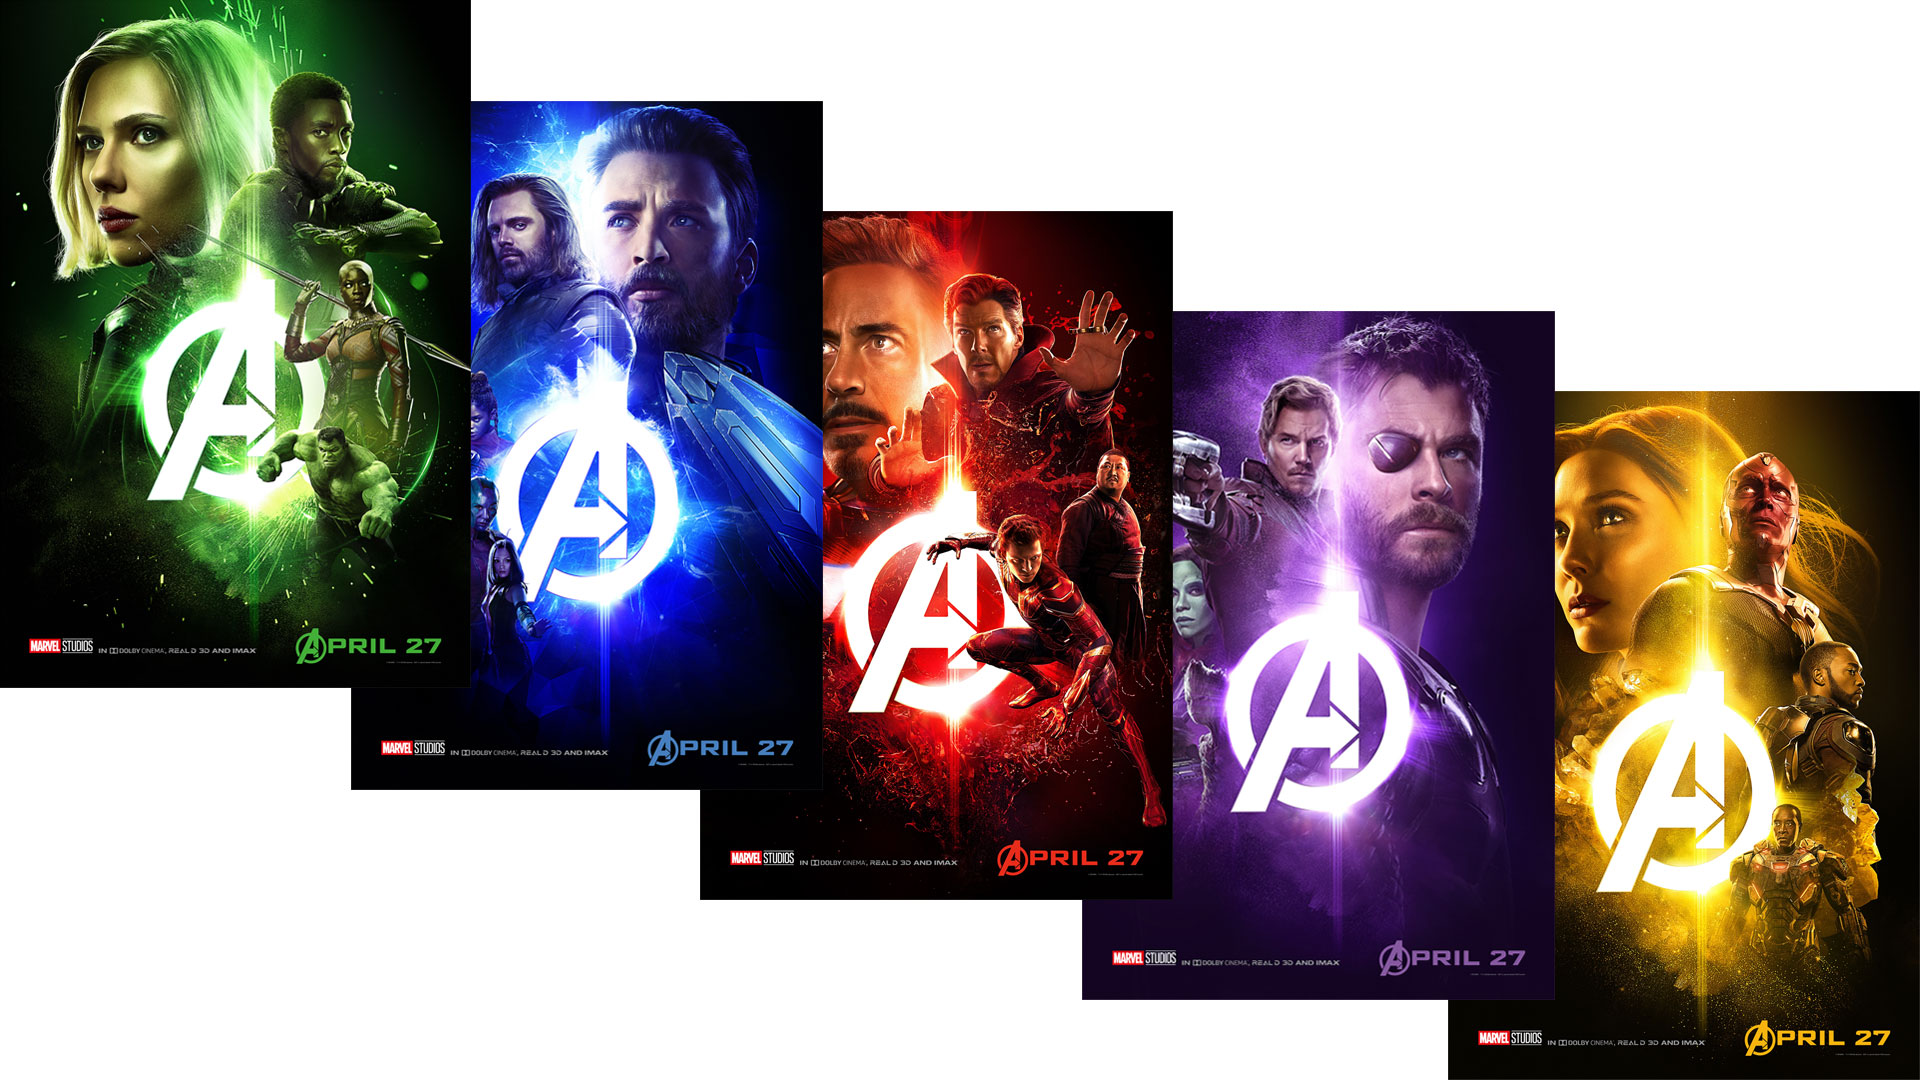 New Avengers: Infinity War Character Group Posters Released by Marvel Studios